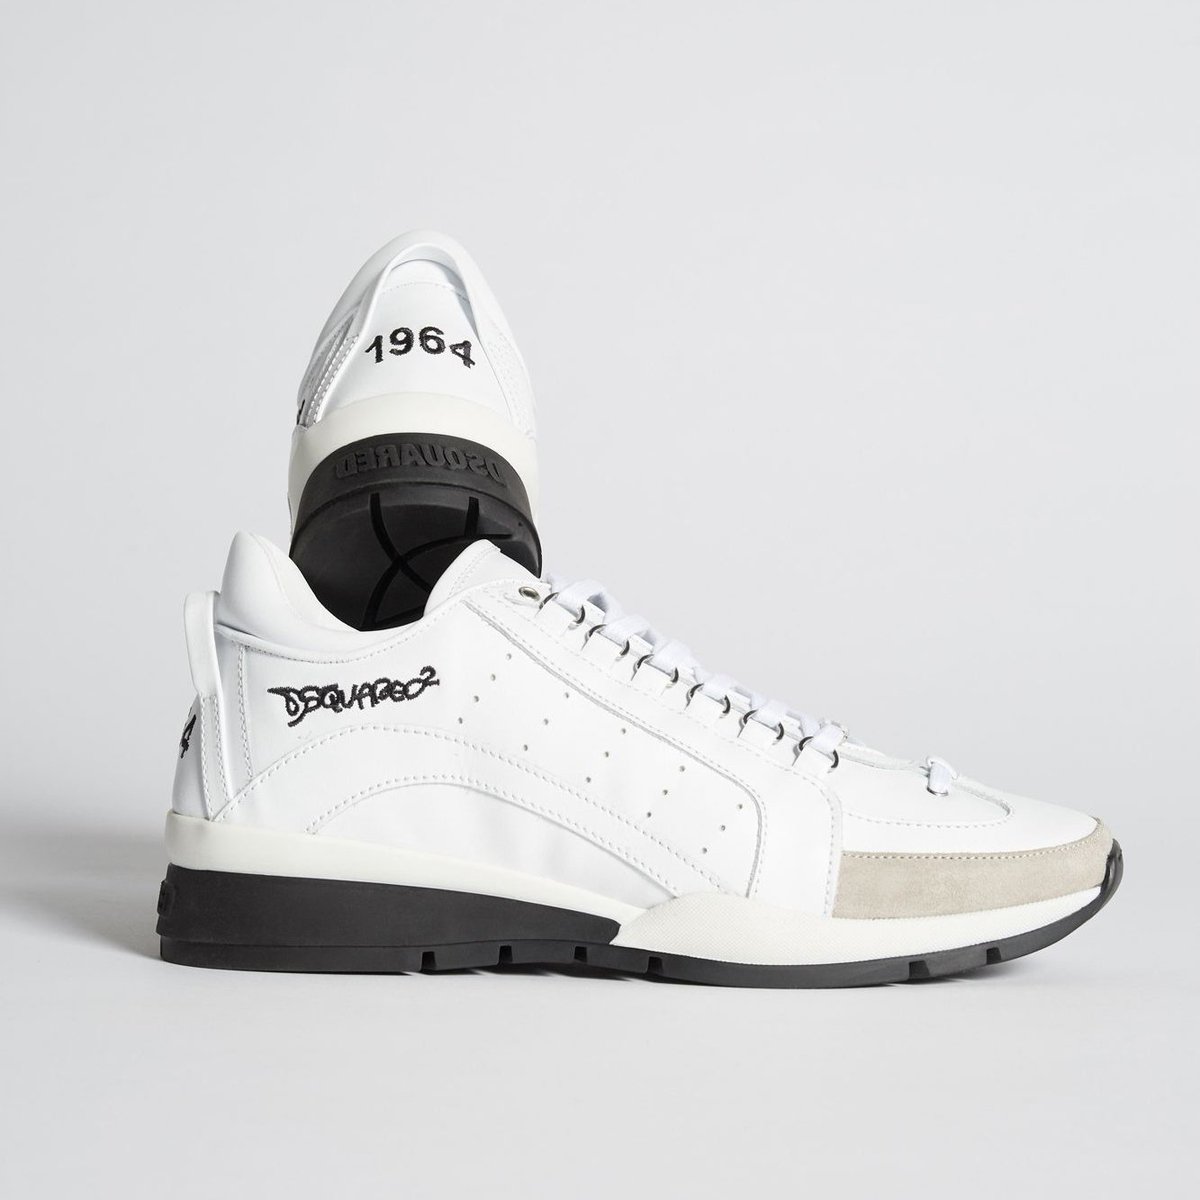 dsquared2 sneakers sale